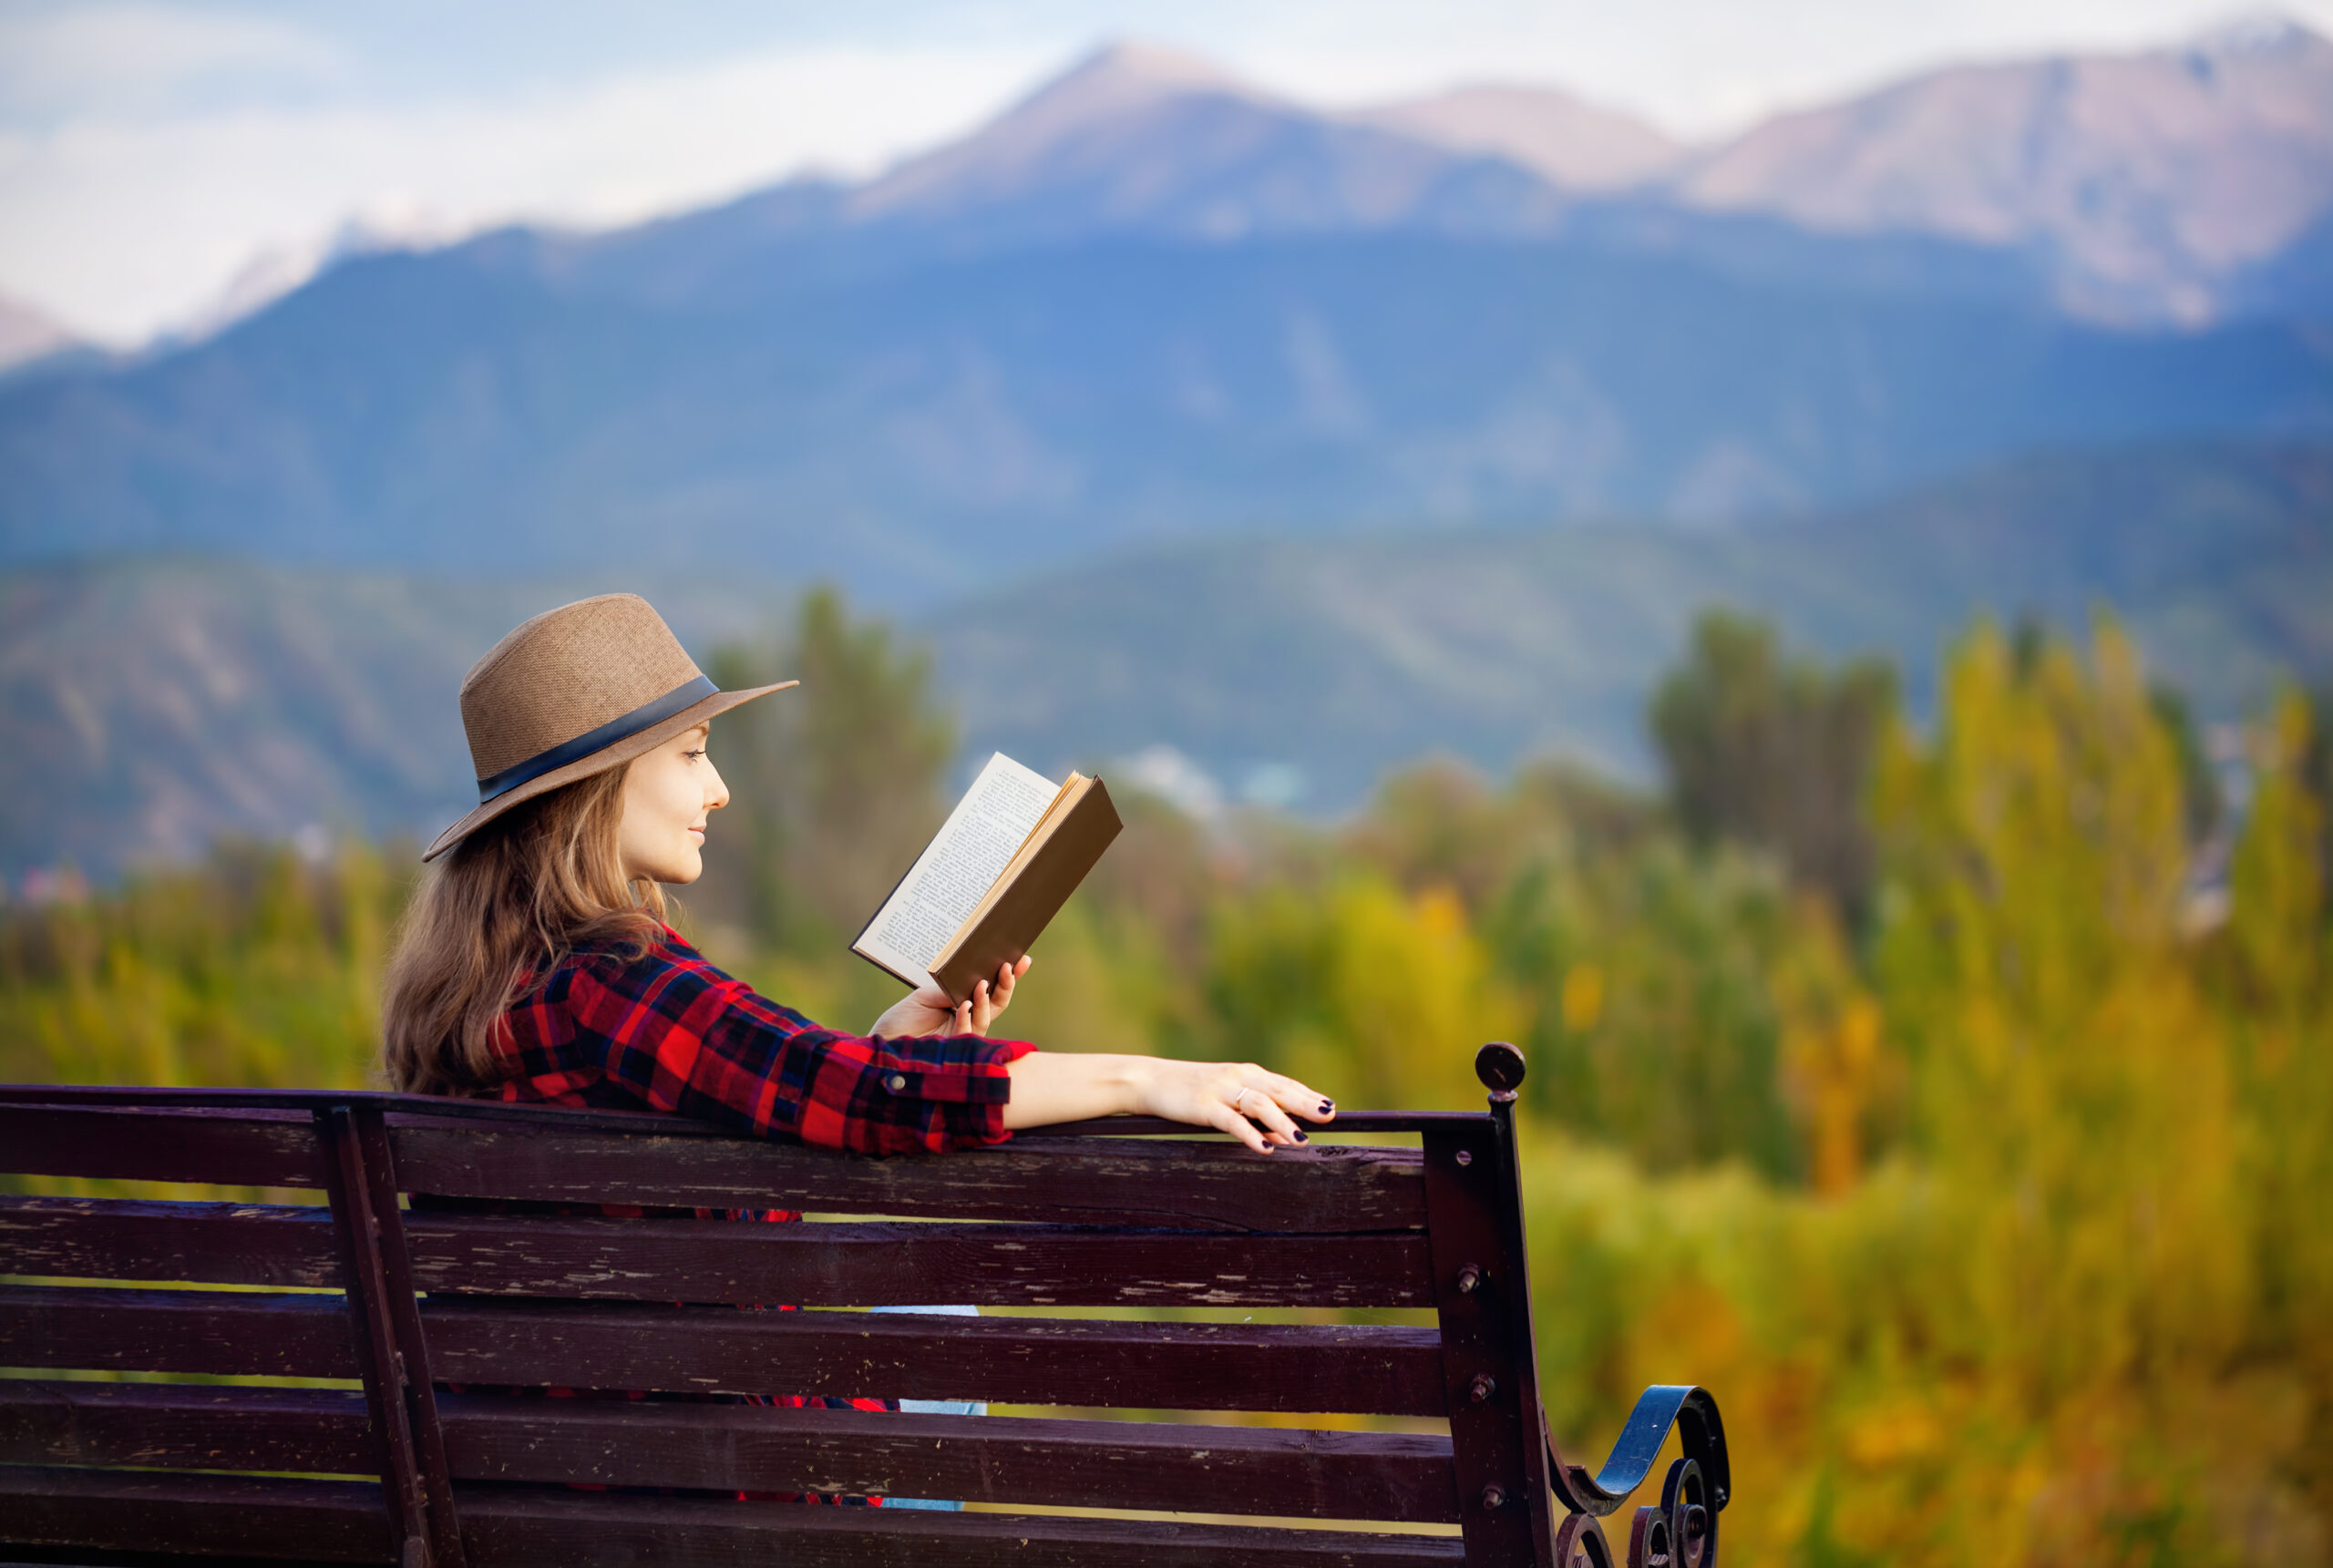 25 Inspirational Books For Women in Their 20s - The Honeyed